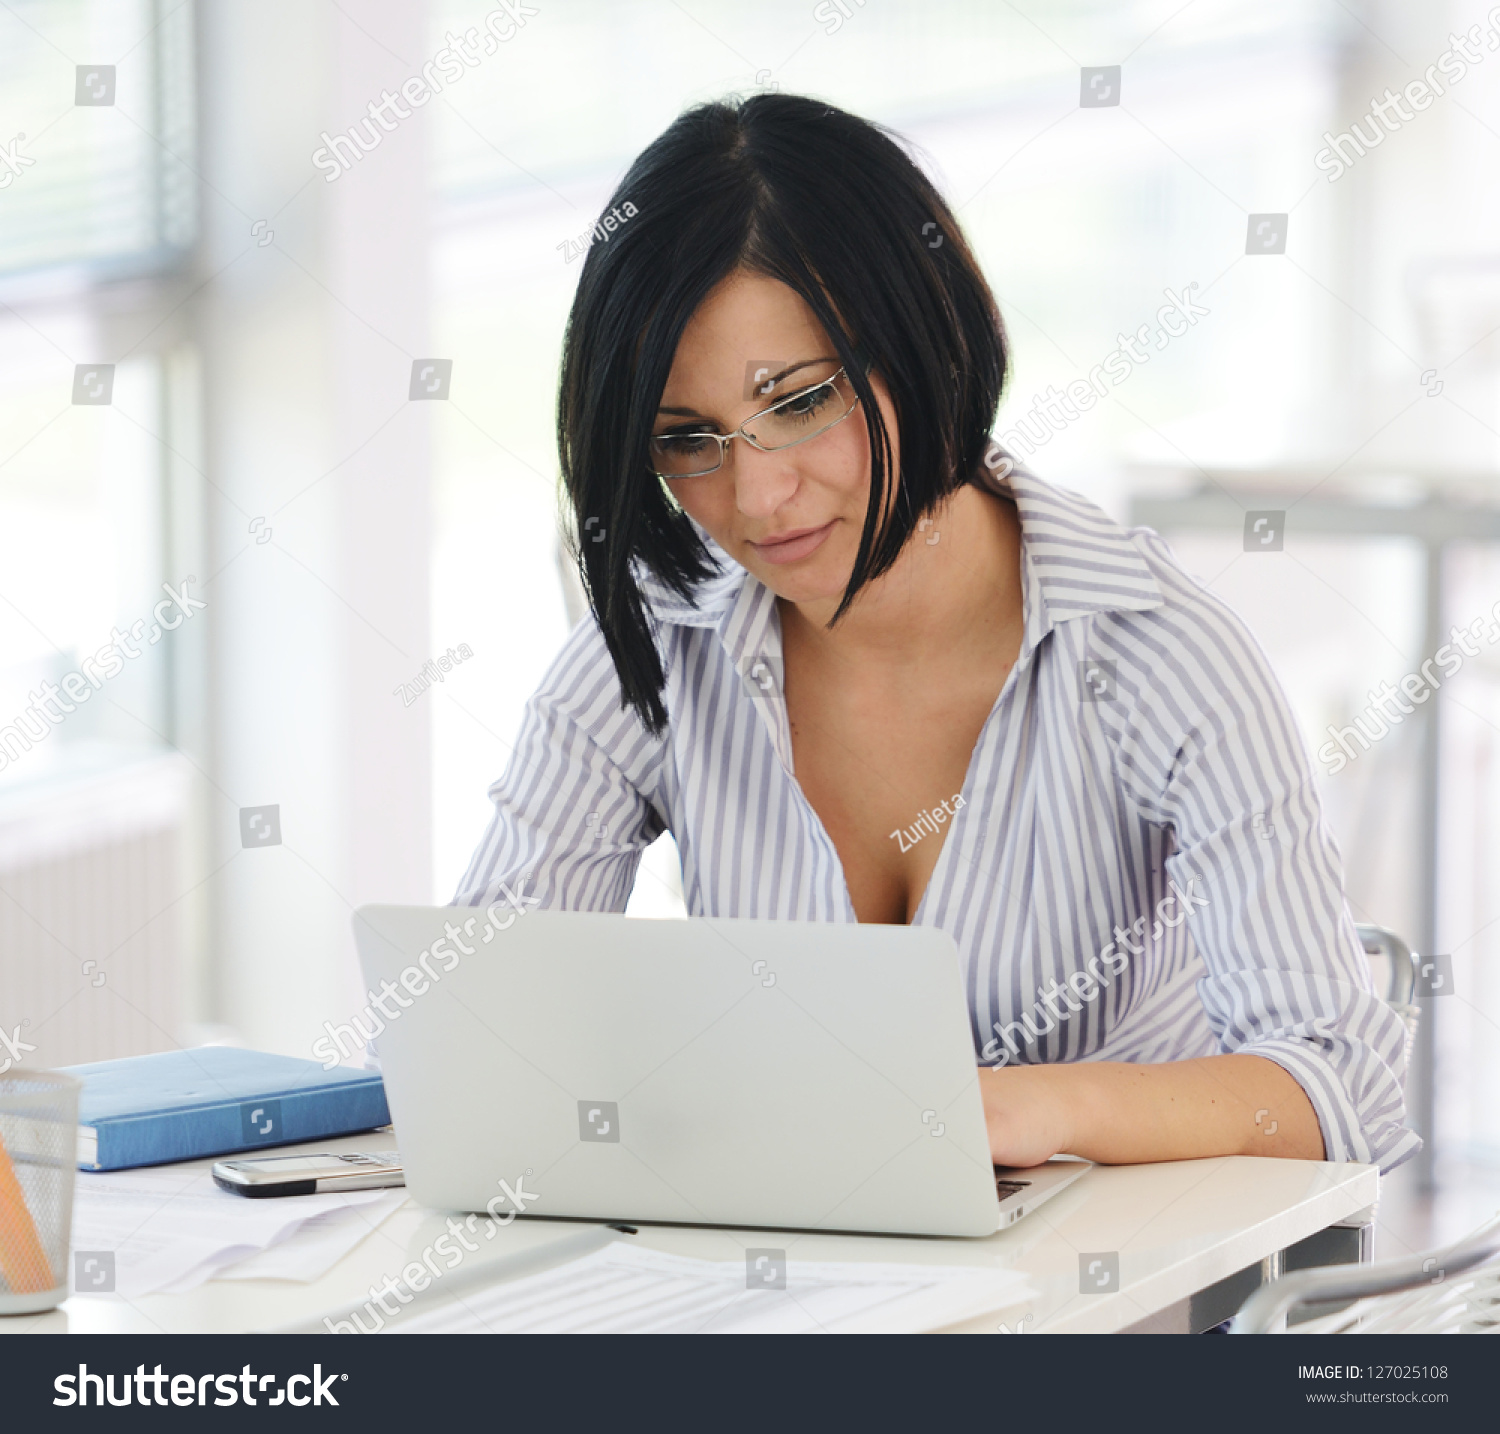 Portrait Of A Pretty Businesswoman Sitting At Her Desk With A Laptop